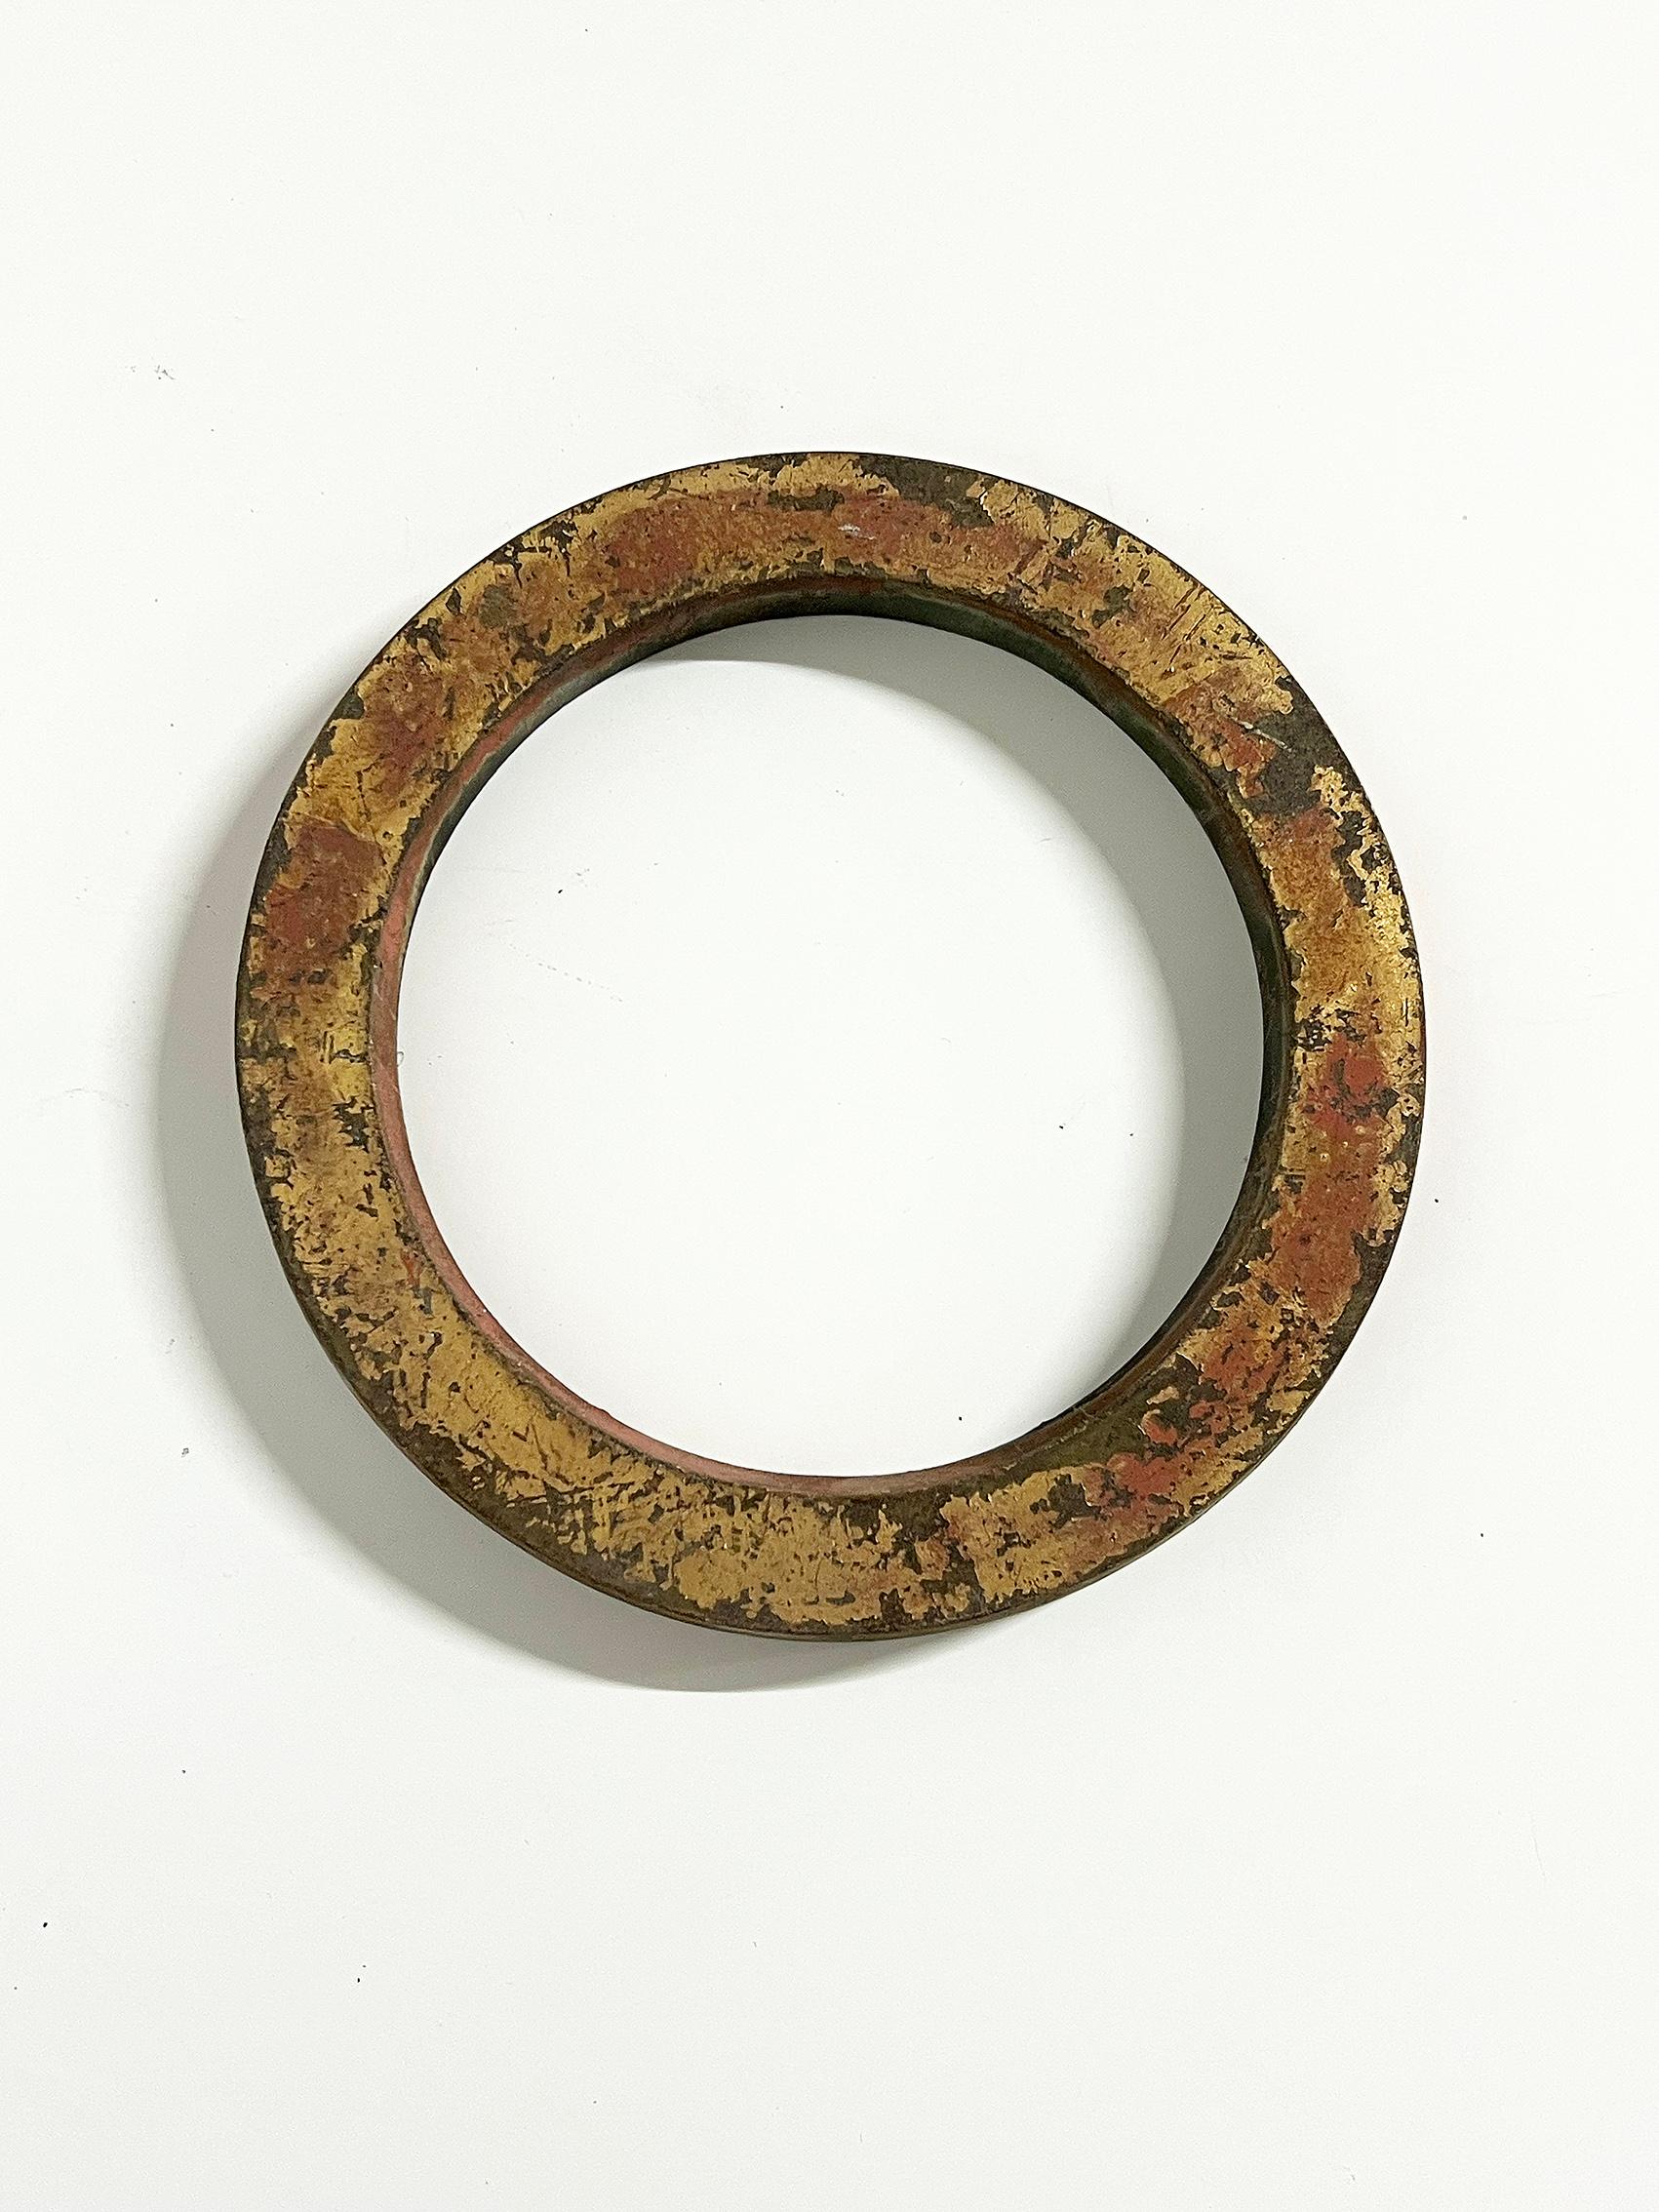 Vintage letter O in solid brass, covered with old paint (red & gold), Sweden ca 1940's.
Wear and patina consistent with age and use. Paint loss as seen on the pictures.
